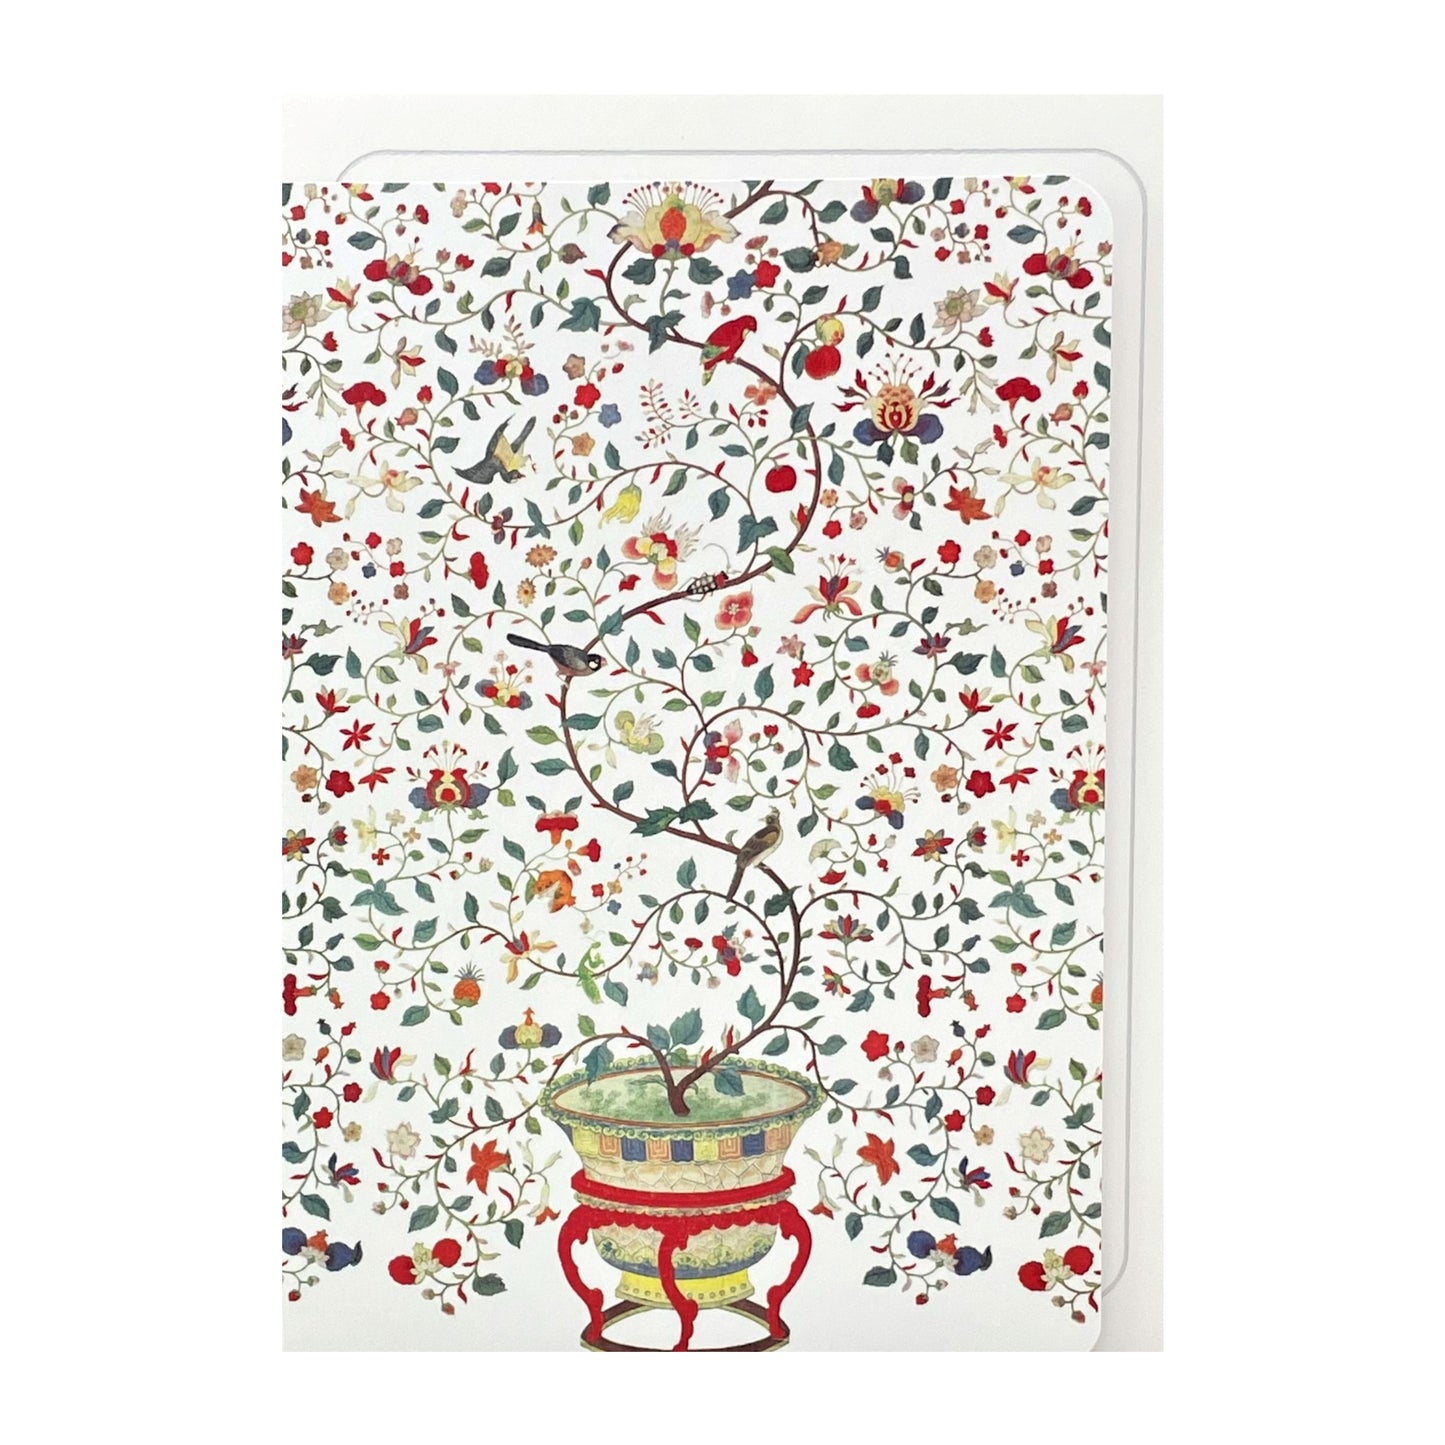 greetings card of a plant in an ornate pot and floral chinese wallpaper in the background by Ezen Design